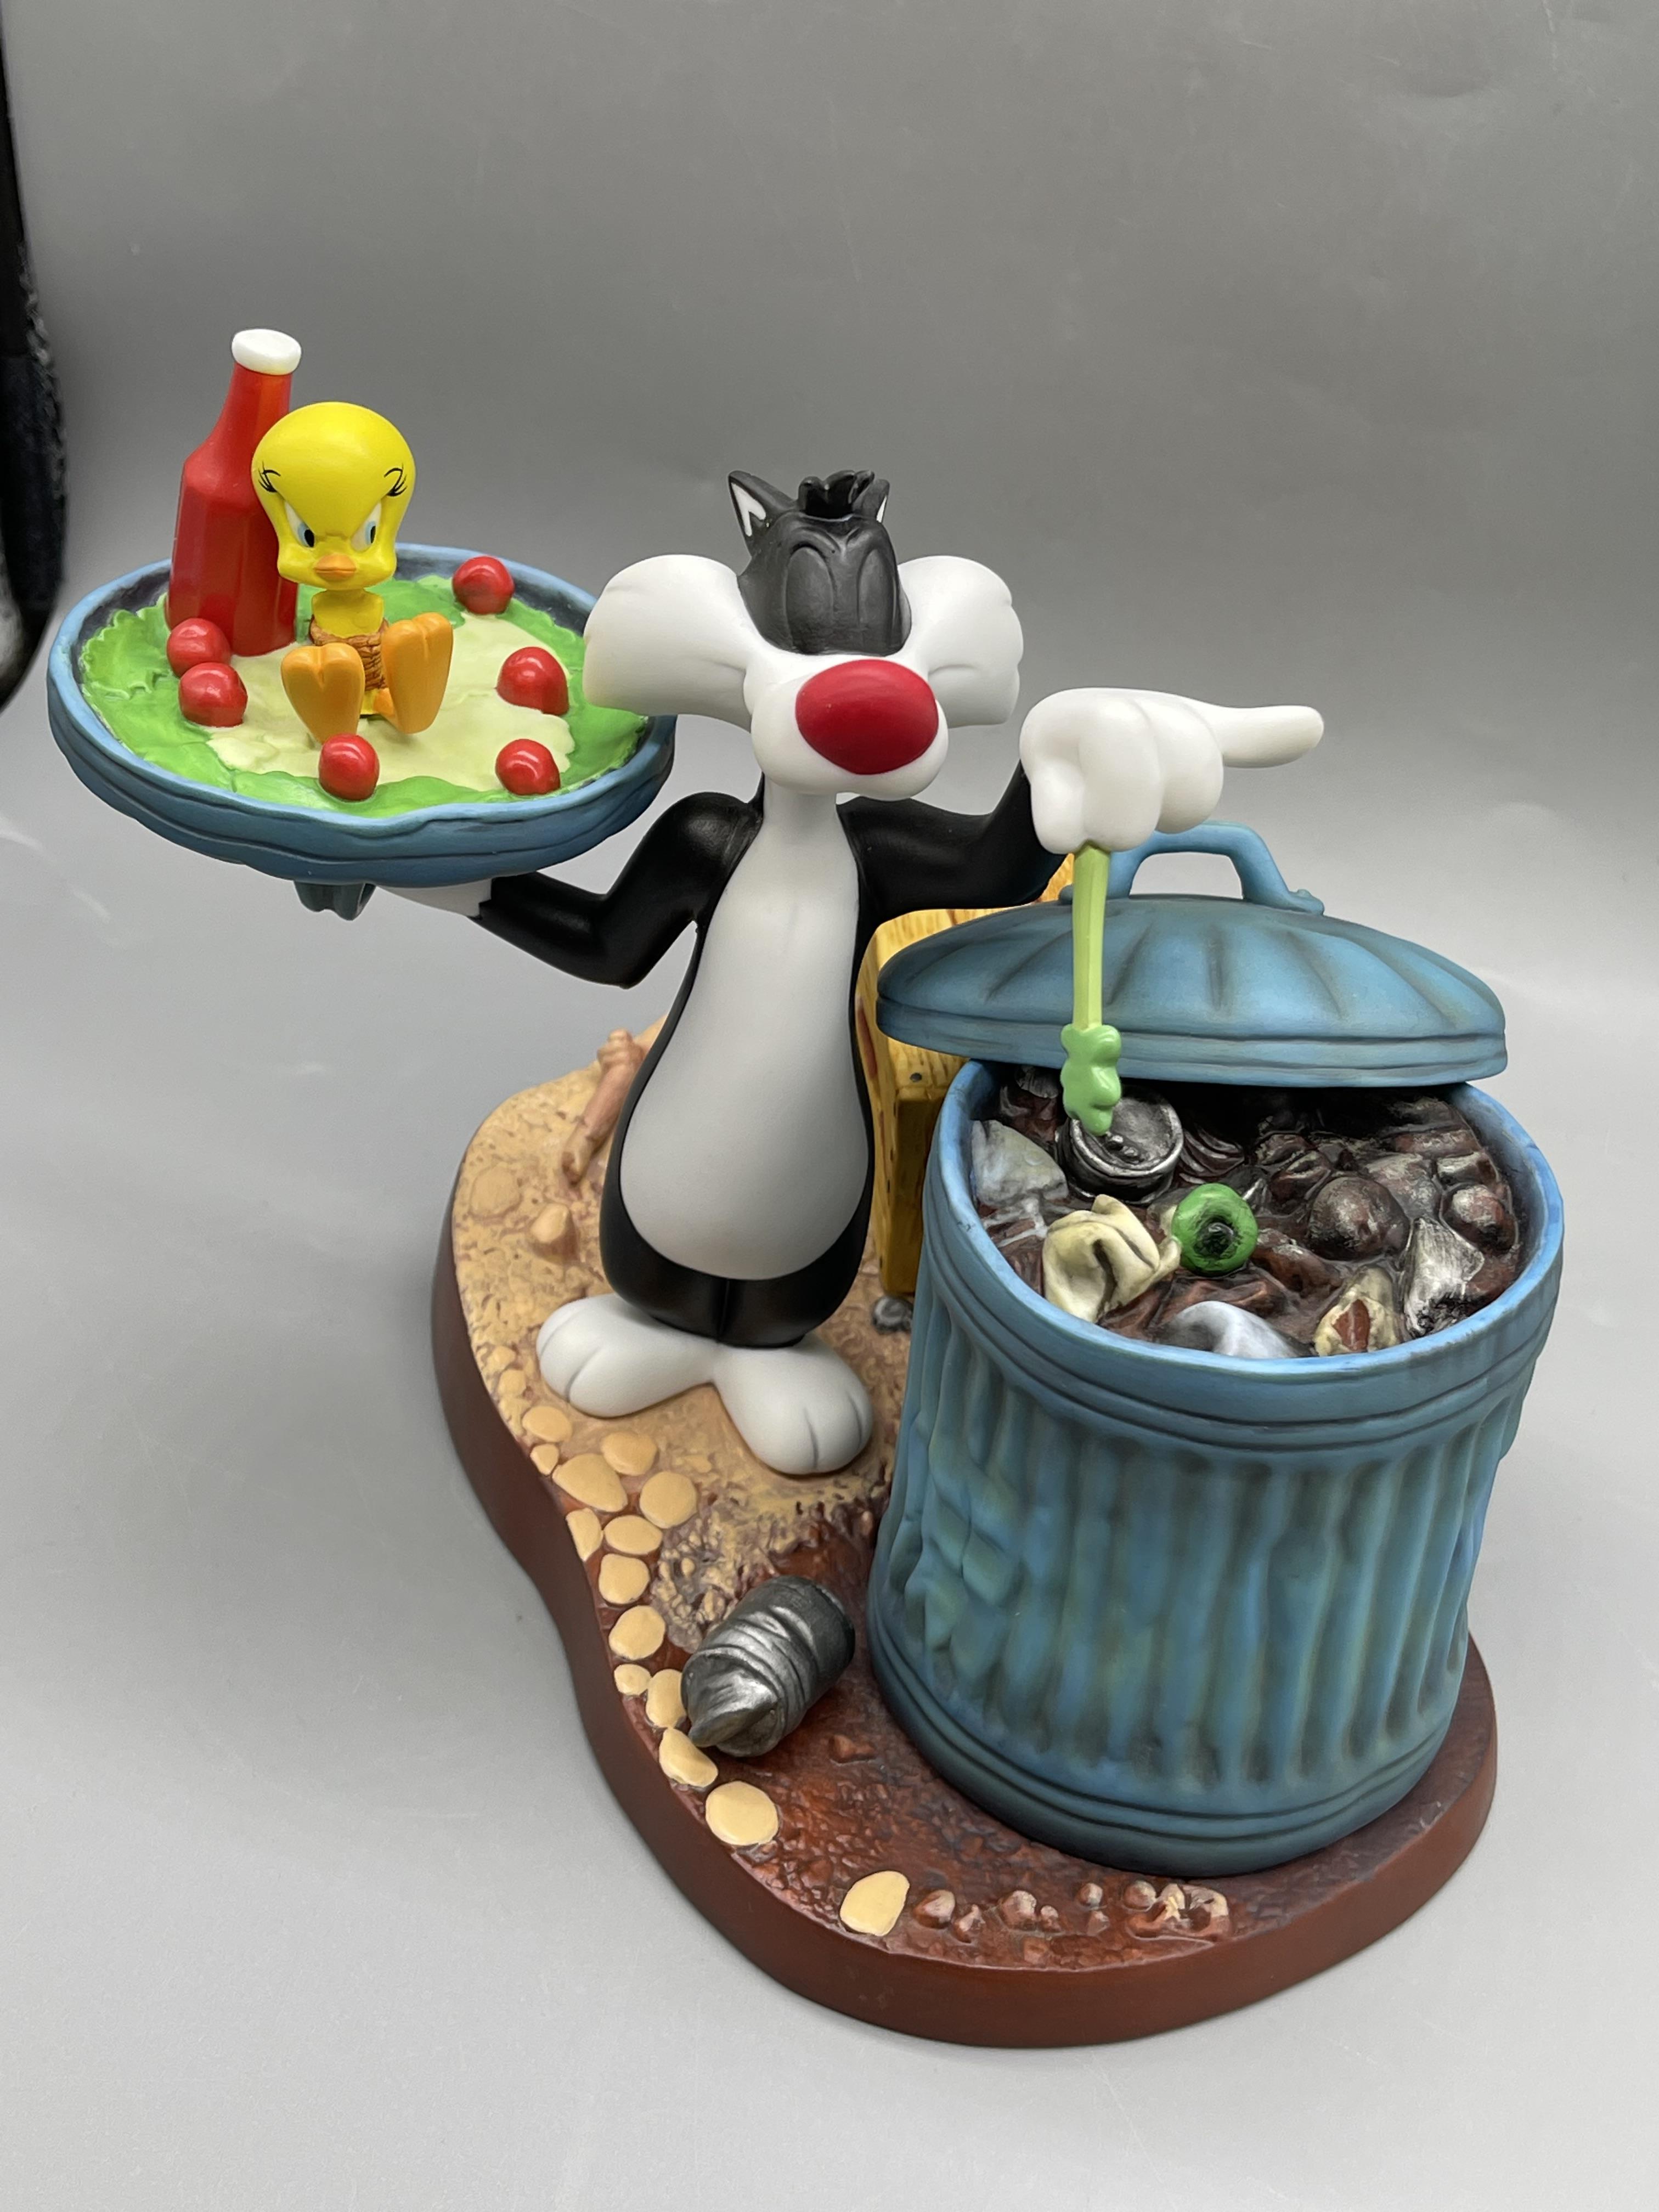 Boxed Wedgewood - Looney Tunes - Sylvester's Buffe - Image 15 of 18